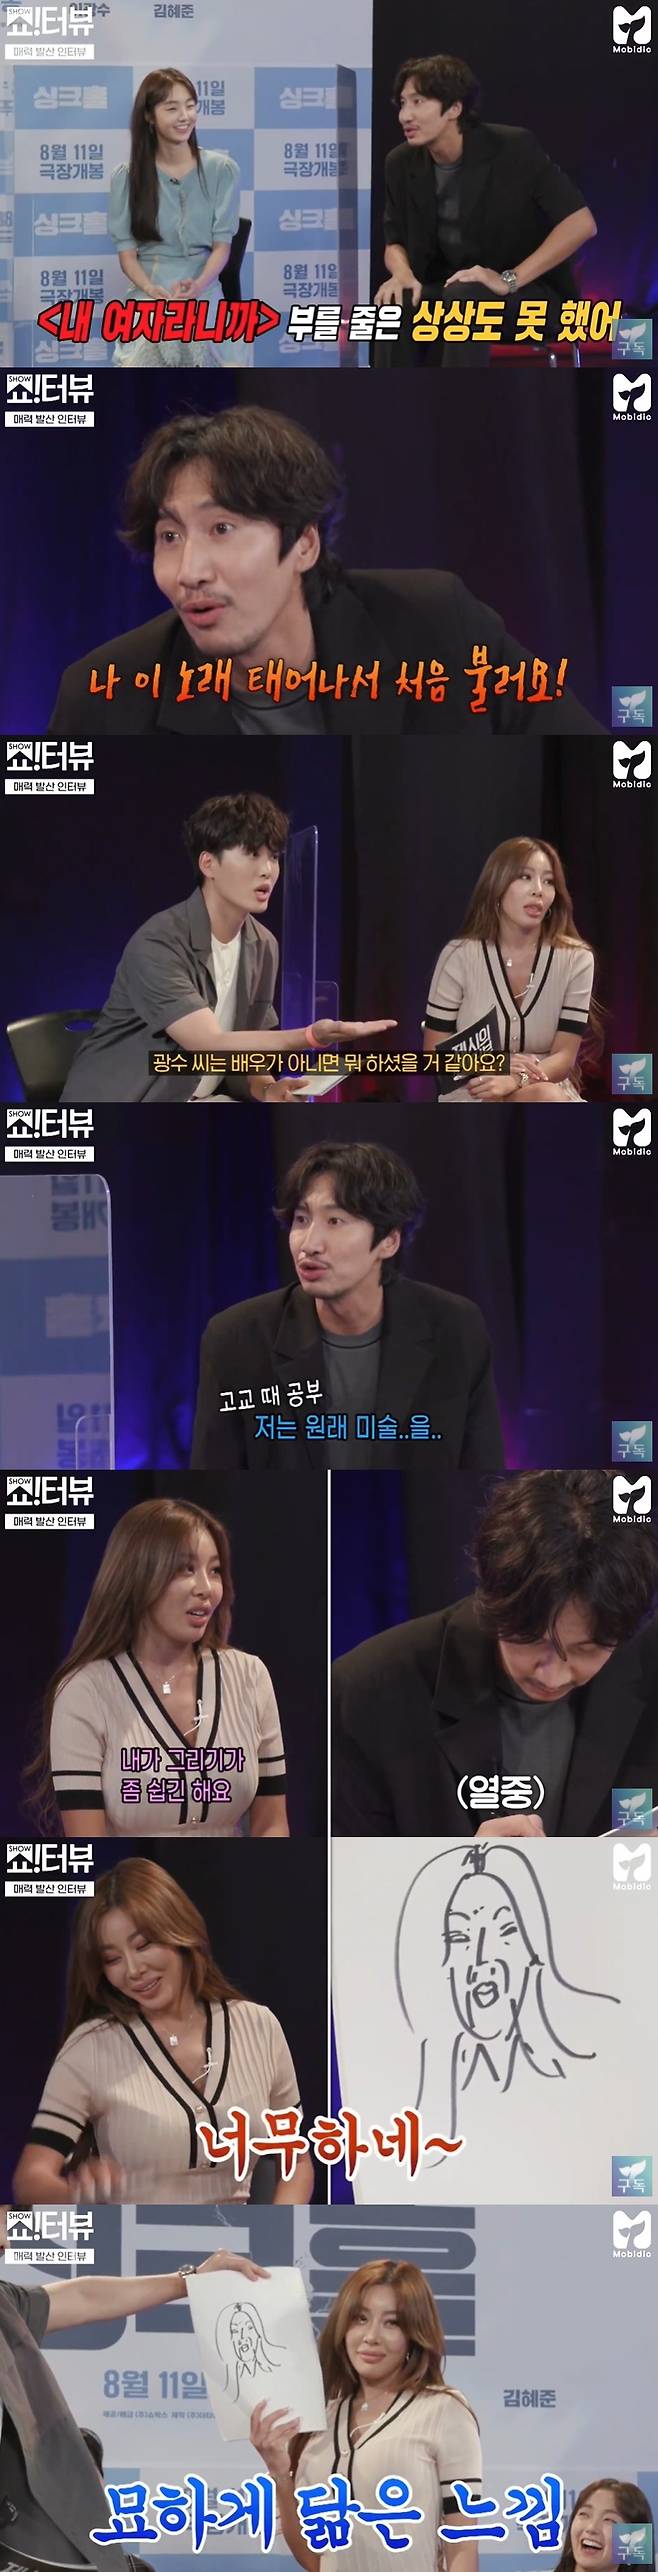 Jessie has expressed dissatisfaction with the painting by Greene Lee Kwang-soo.On July 29, SBS YouTubes Moby Dick channel Jessies Show!Turview posted a video titled Lee Kwang-soo X Kim Sung-kyun X Kim Hye-joon, who came to promote the movie Sink Hall and fell into a show interview.On this day, guests conducted an attractive divergence interview and had time to emit charm to escape the recording site.Jessie and Jo Jeong-sik announcers said, I wanted to show dance in a show interview. They drove Lee Kwang-soo to the end and hit Settai to sing one of Lee Seung-gis My Girl, Suns Eye, Nose, Mouth and Jessies Snowy Sister.Lee Kwang-soo sang, but said, I honestly never thought Id wake up this morning and call her My Girl. Jessie said, Its a foul.When I saw it, I called it a lot in the karaoke room. Lee Kwang-soo said, I was born this song for the first time.I dont think Id escape anyway if I did this.When asked what he would have done if he wasnt an actor, Lee Kwang-soo revealed he studied art in high school.Jo Jin-sik announcer asked me to draw Jessie Portrait in 20 seconds.Jessie said, Its easy for me to draw.I just need to draw my lips big, said Jo Jin-sik, an announcer who said, I think you are in Wolmido.Kim Sung-kyun also said, Feelings is good. It is like a painter with a story.